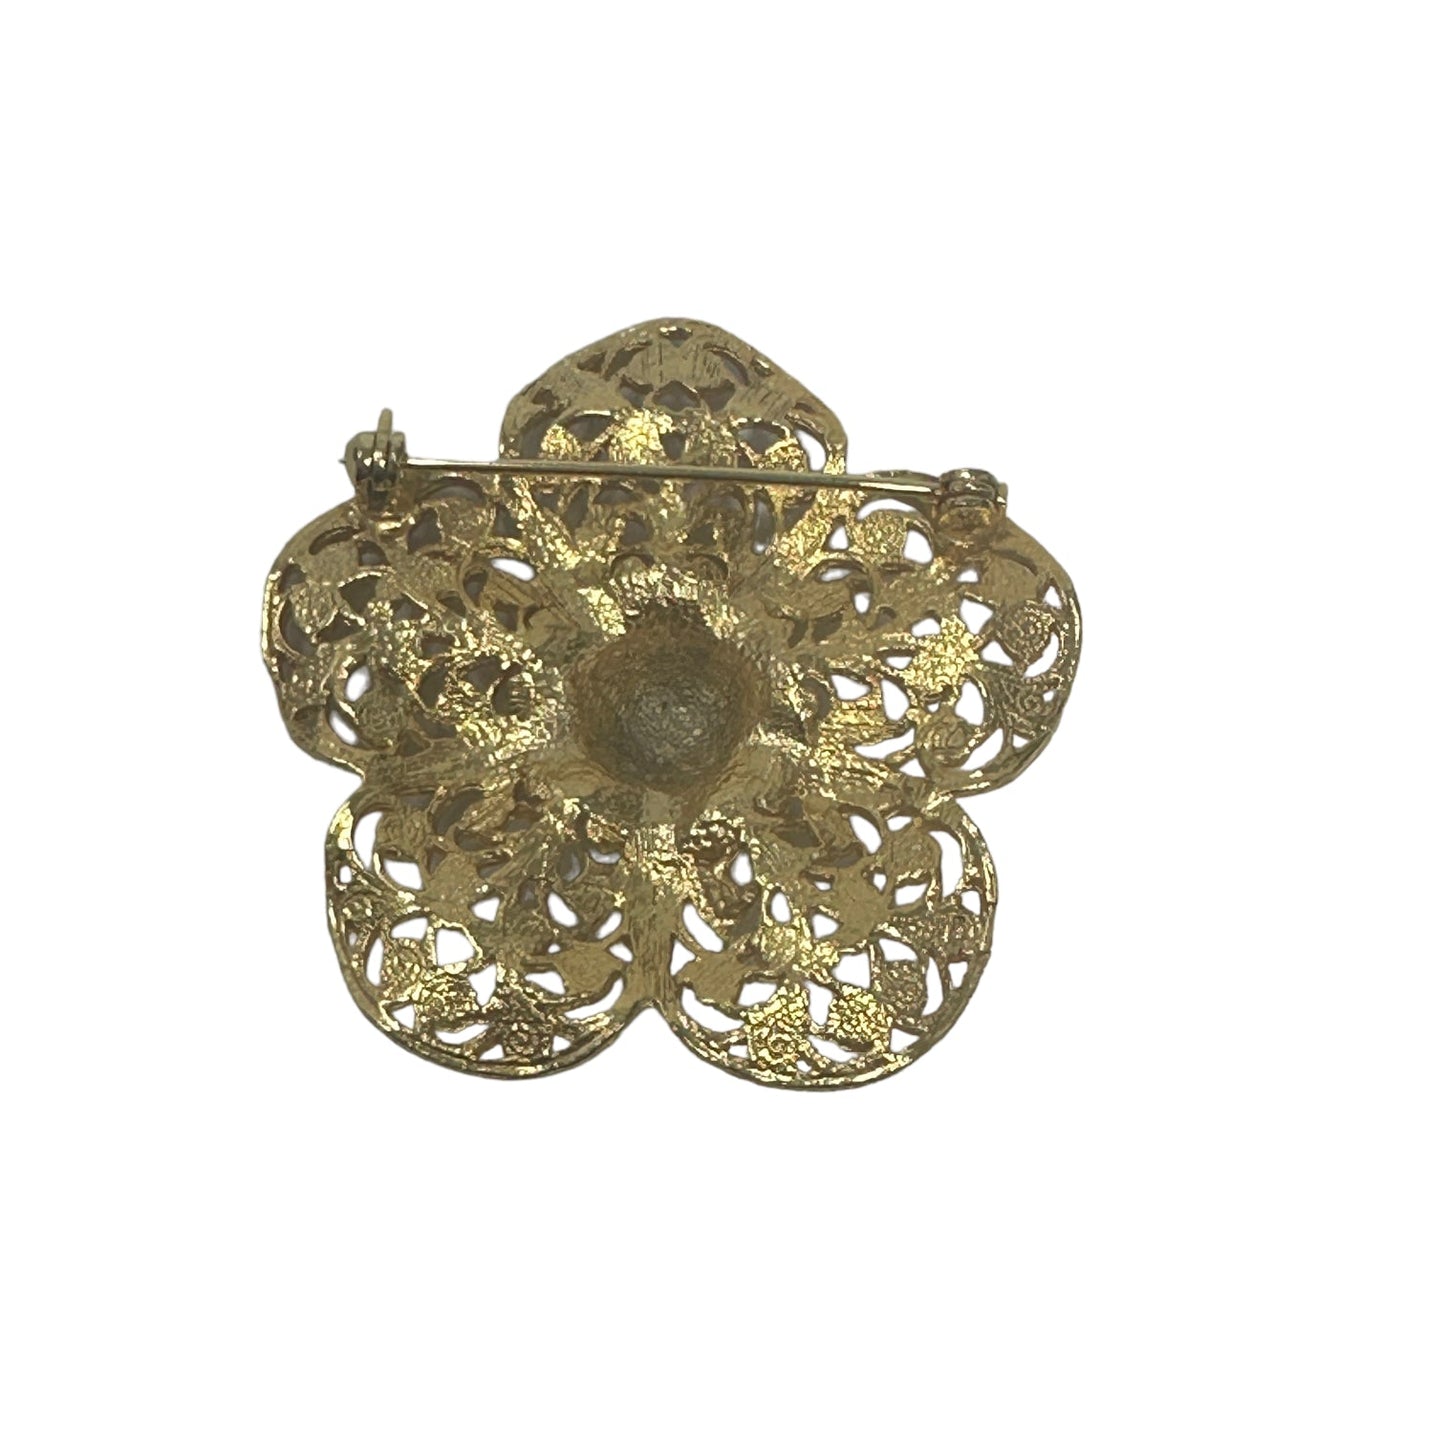 Ornate Gold & Pearl Tone Pin By Unknown Brand